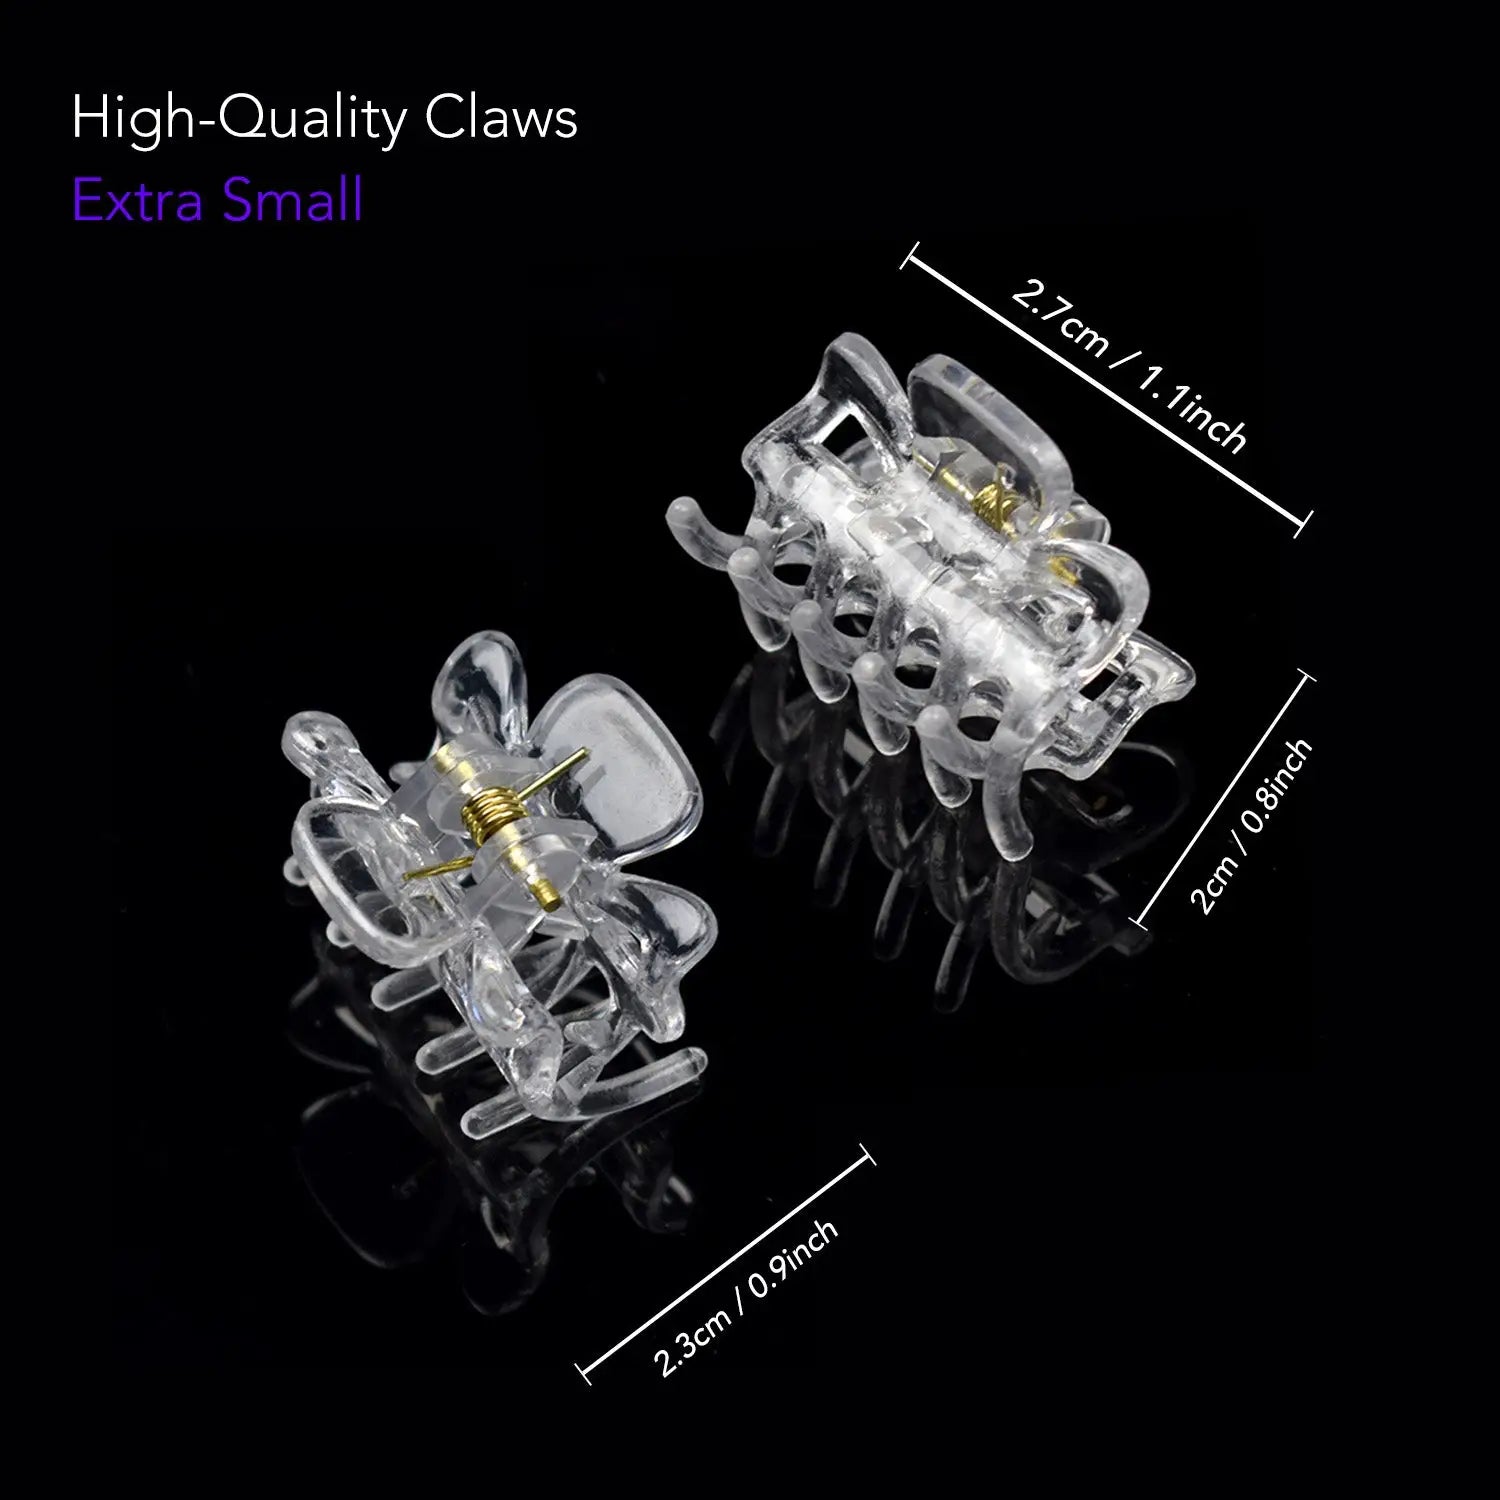 Clear glass ear plugs with gold accents displayed in Essential Hair claw clips set.